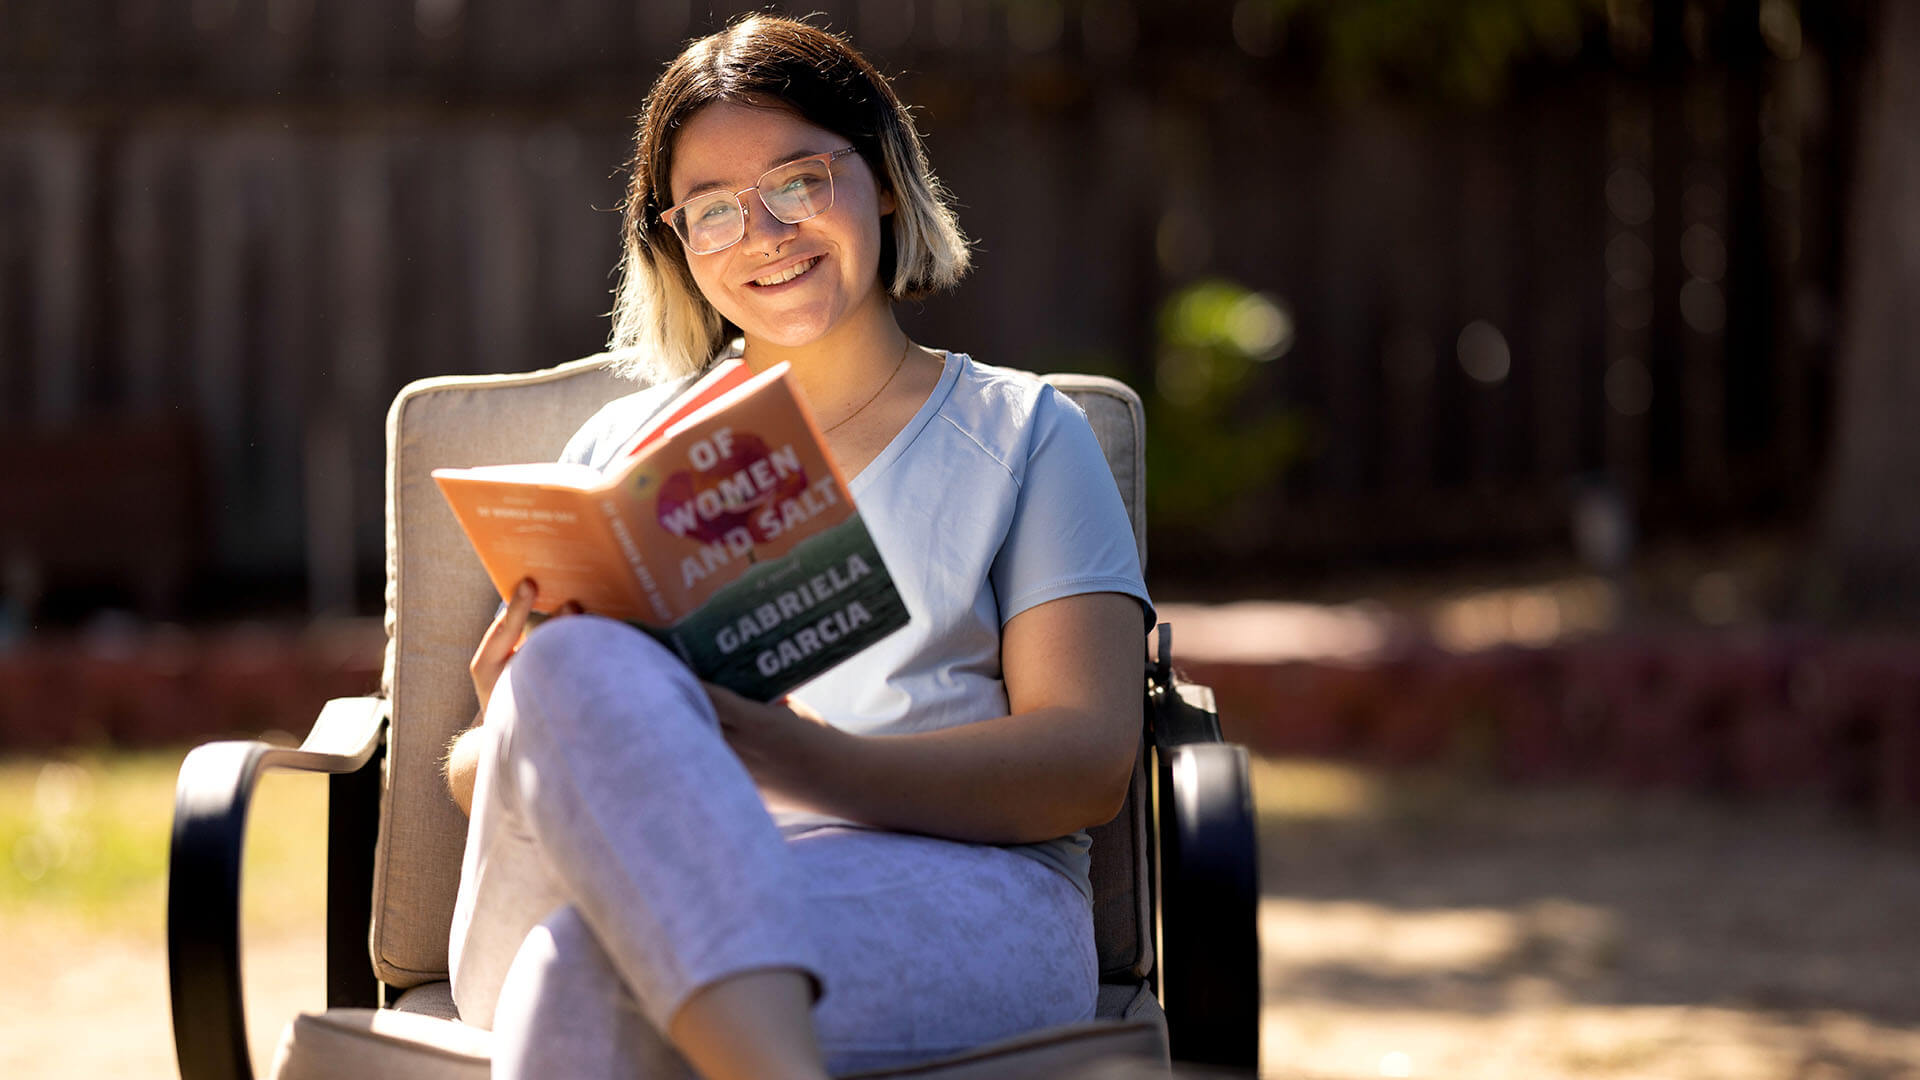 A woman with glasses smiles at the camera while holding a book titled “Of Women and Salt.” 